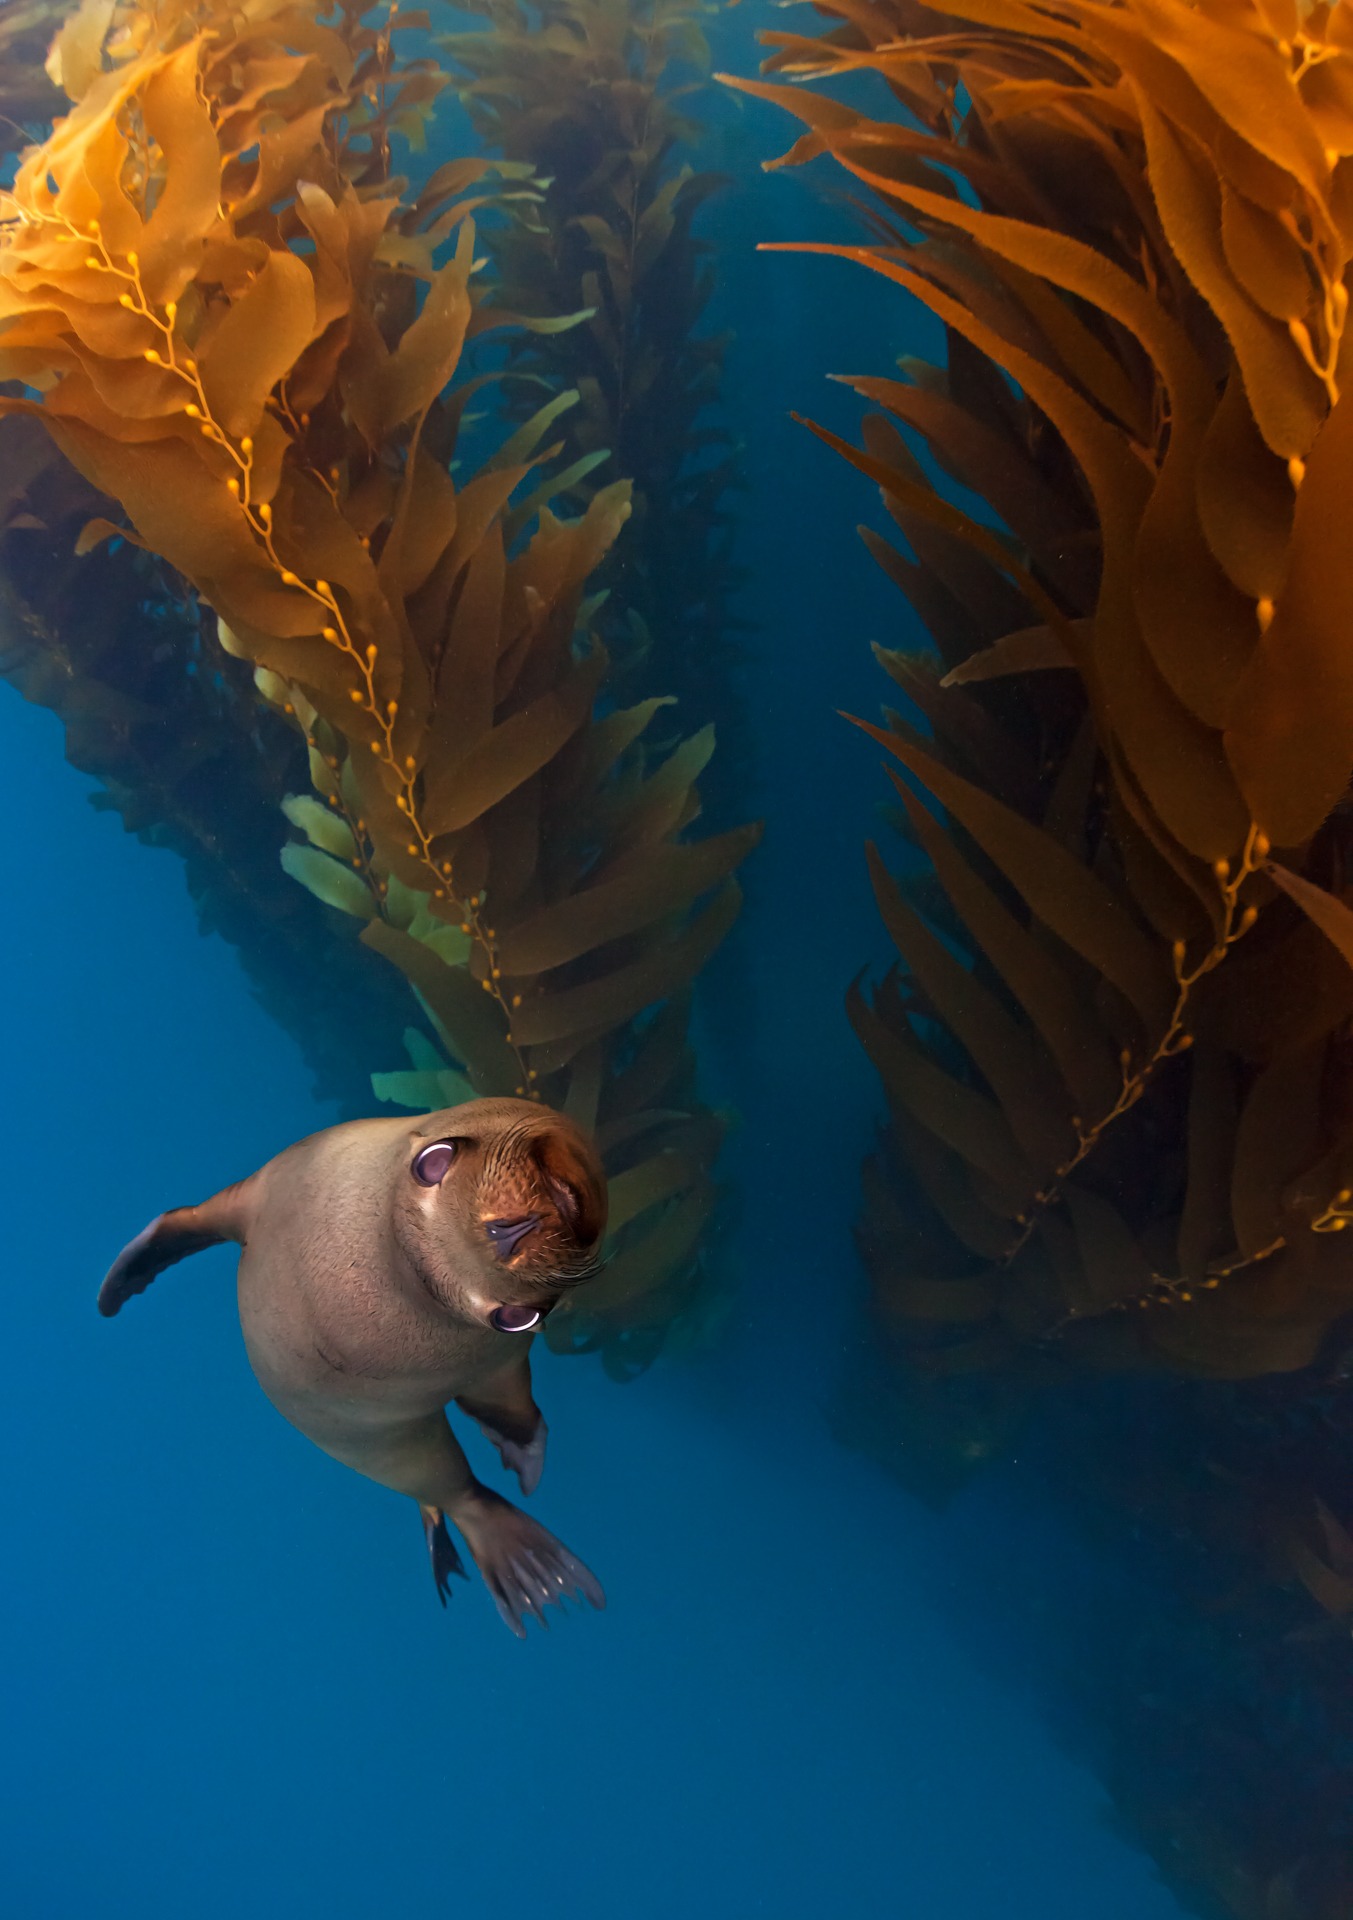 C6_3 Caudio Contreras Sea Lion in the forest Nature Photographer of the Year Contest 2017